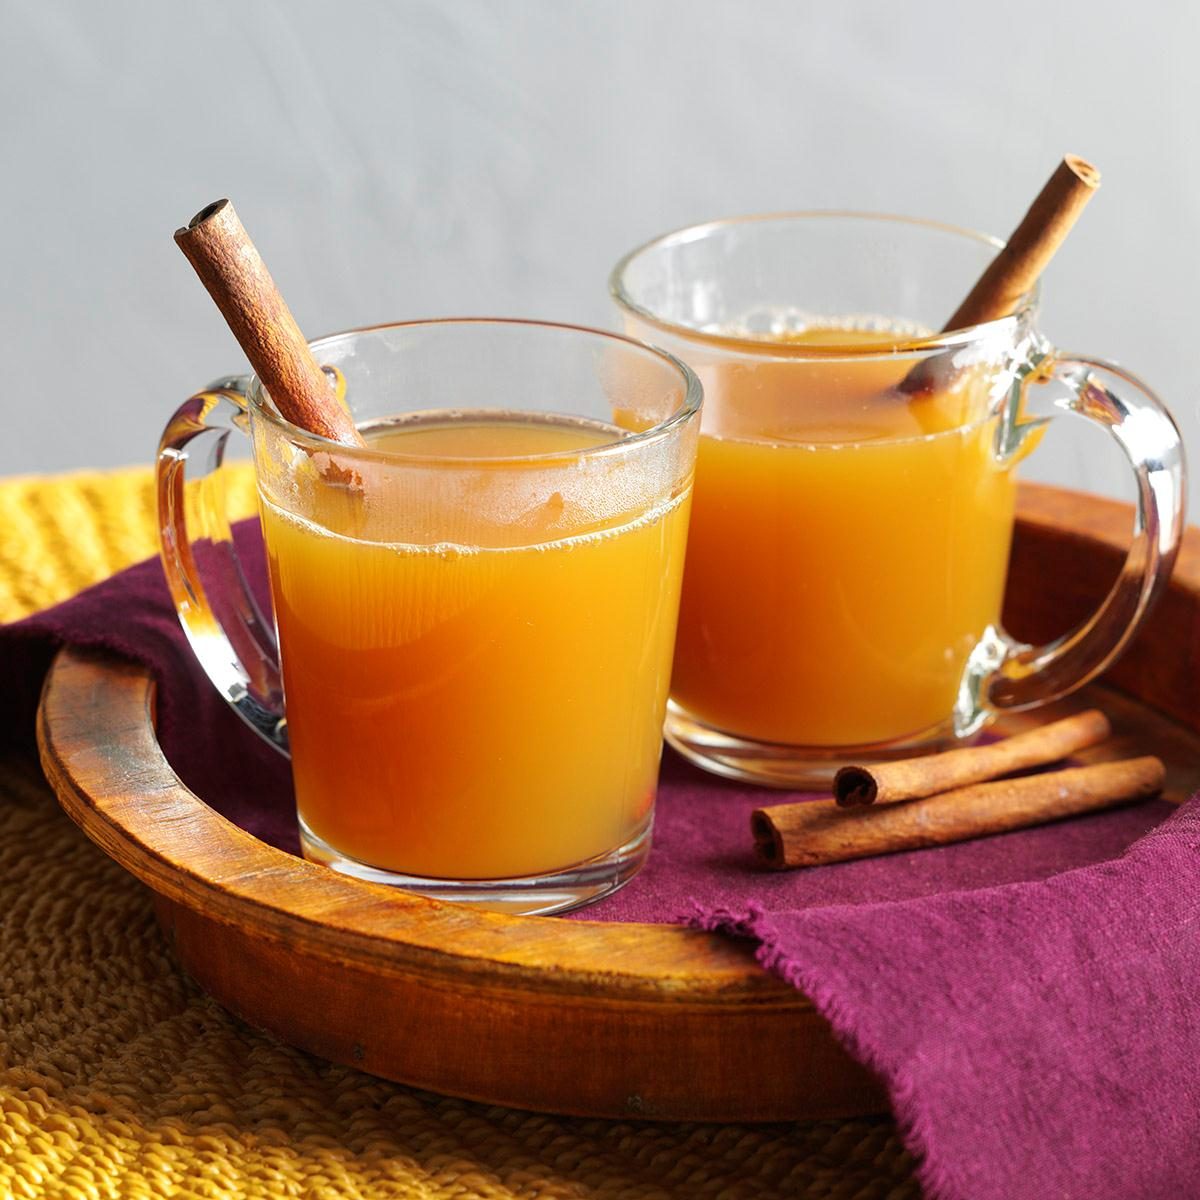 Spiced Hot Apple Cider Recipe How To Make It